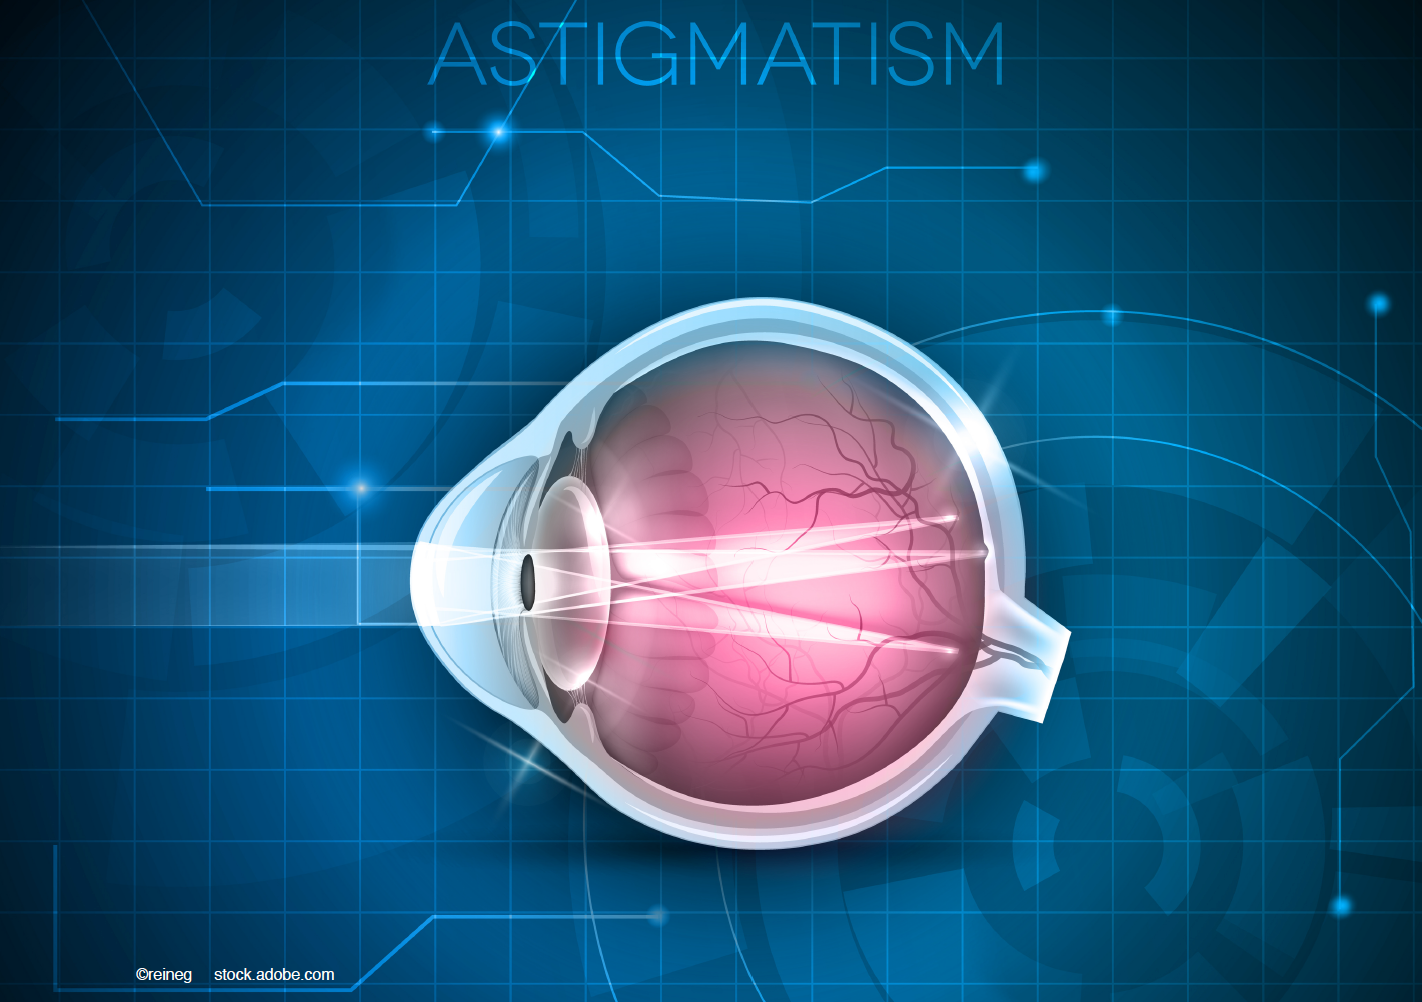 The investigators concluded that implantation of a toric IOL continues to be the procedure of choice to correct moderate astigmatism after cataract surgery. 